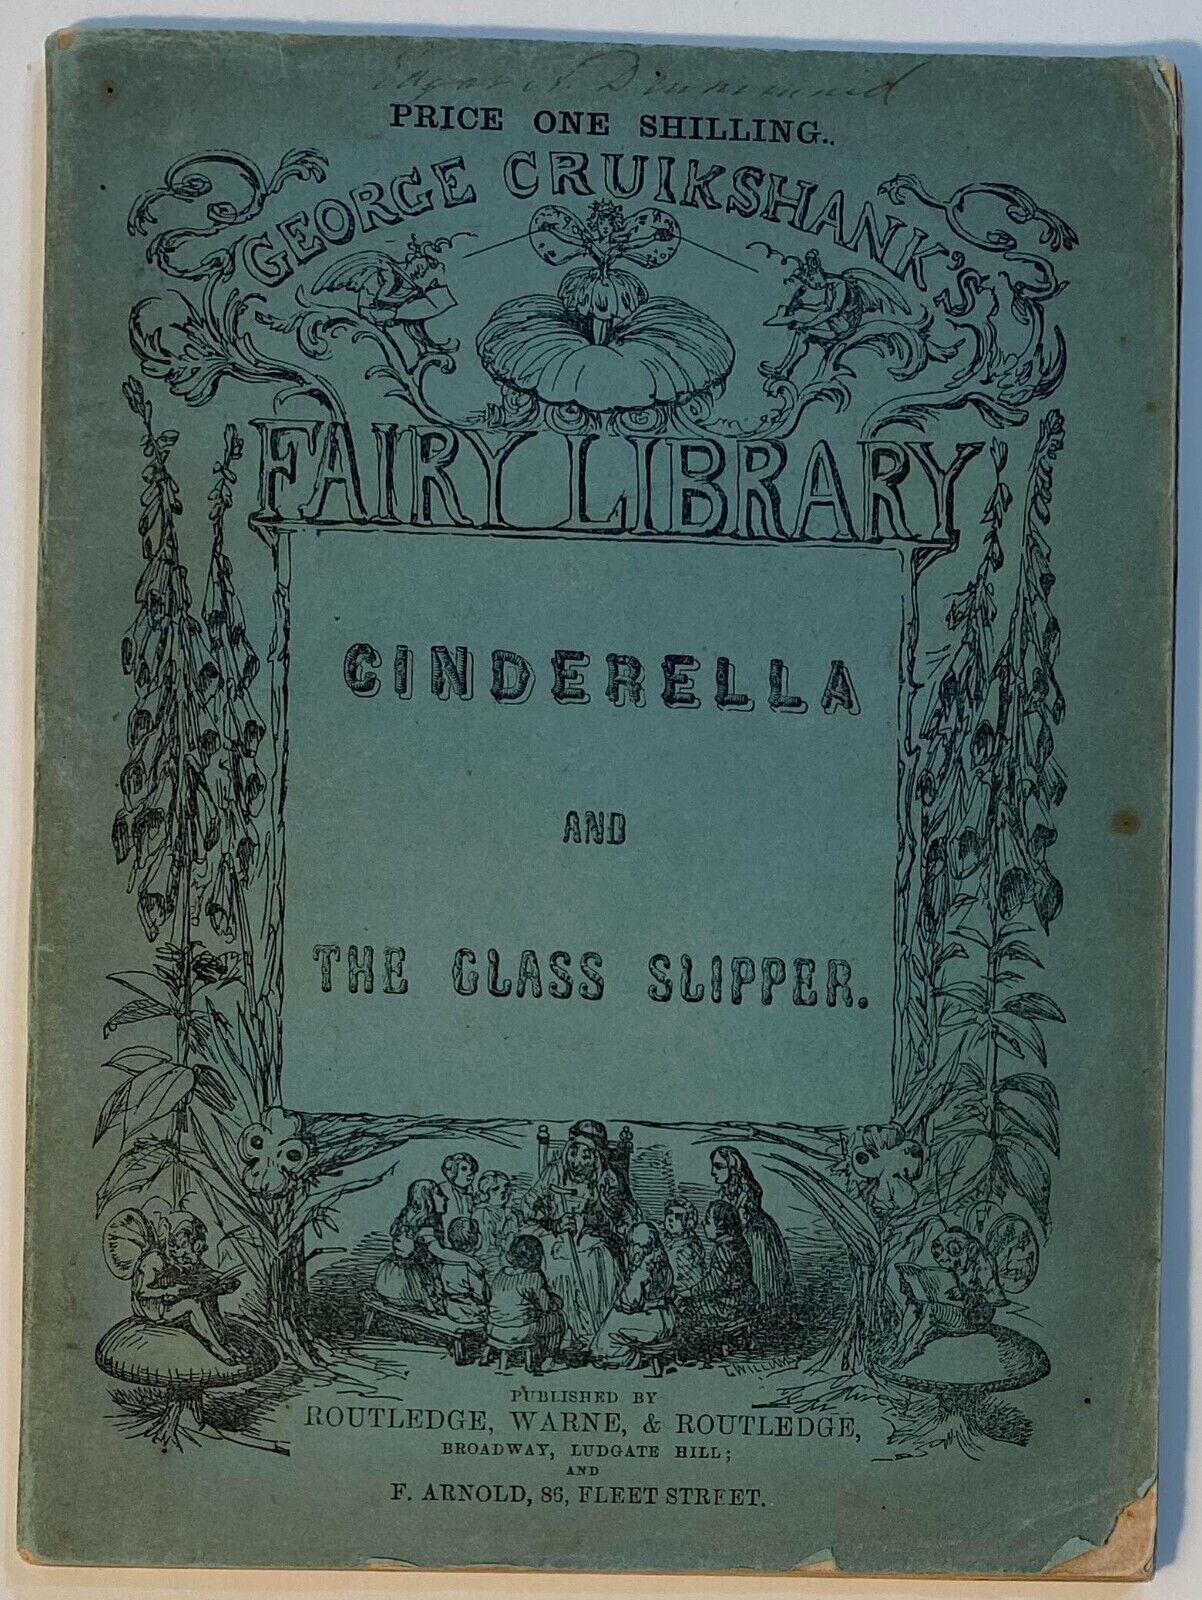 Antique Cinderella and The Little Glass Slipper George Cruikshank 1868 Softcover